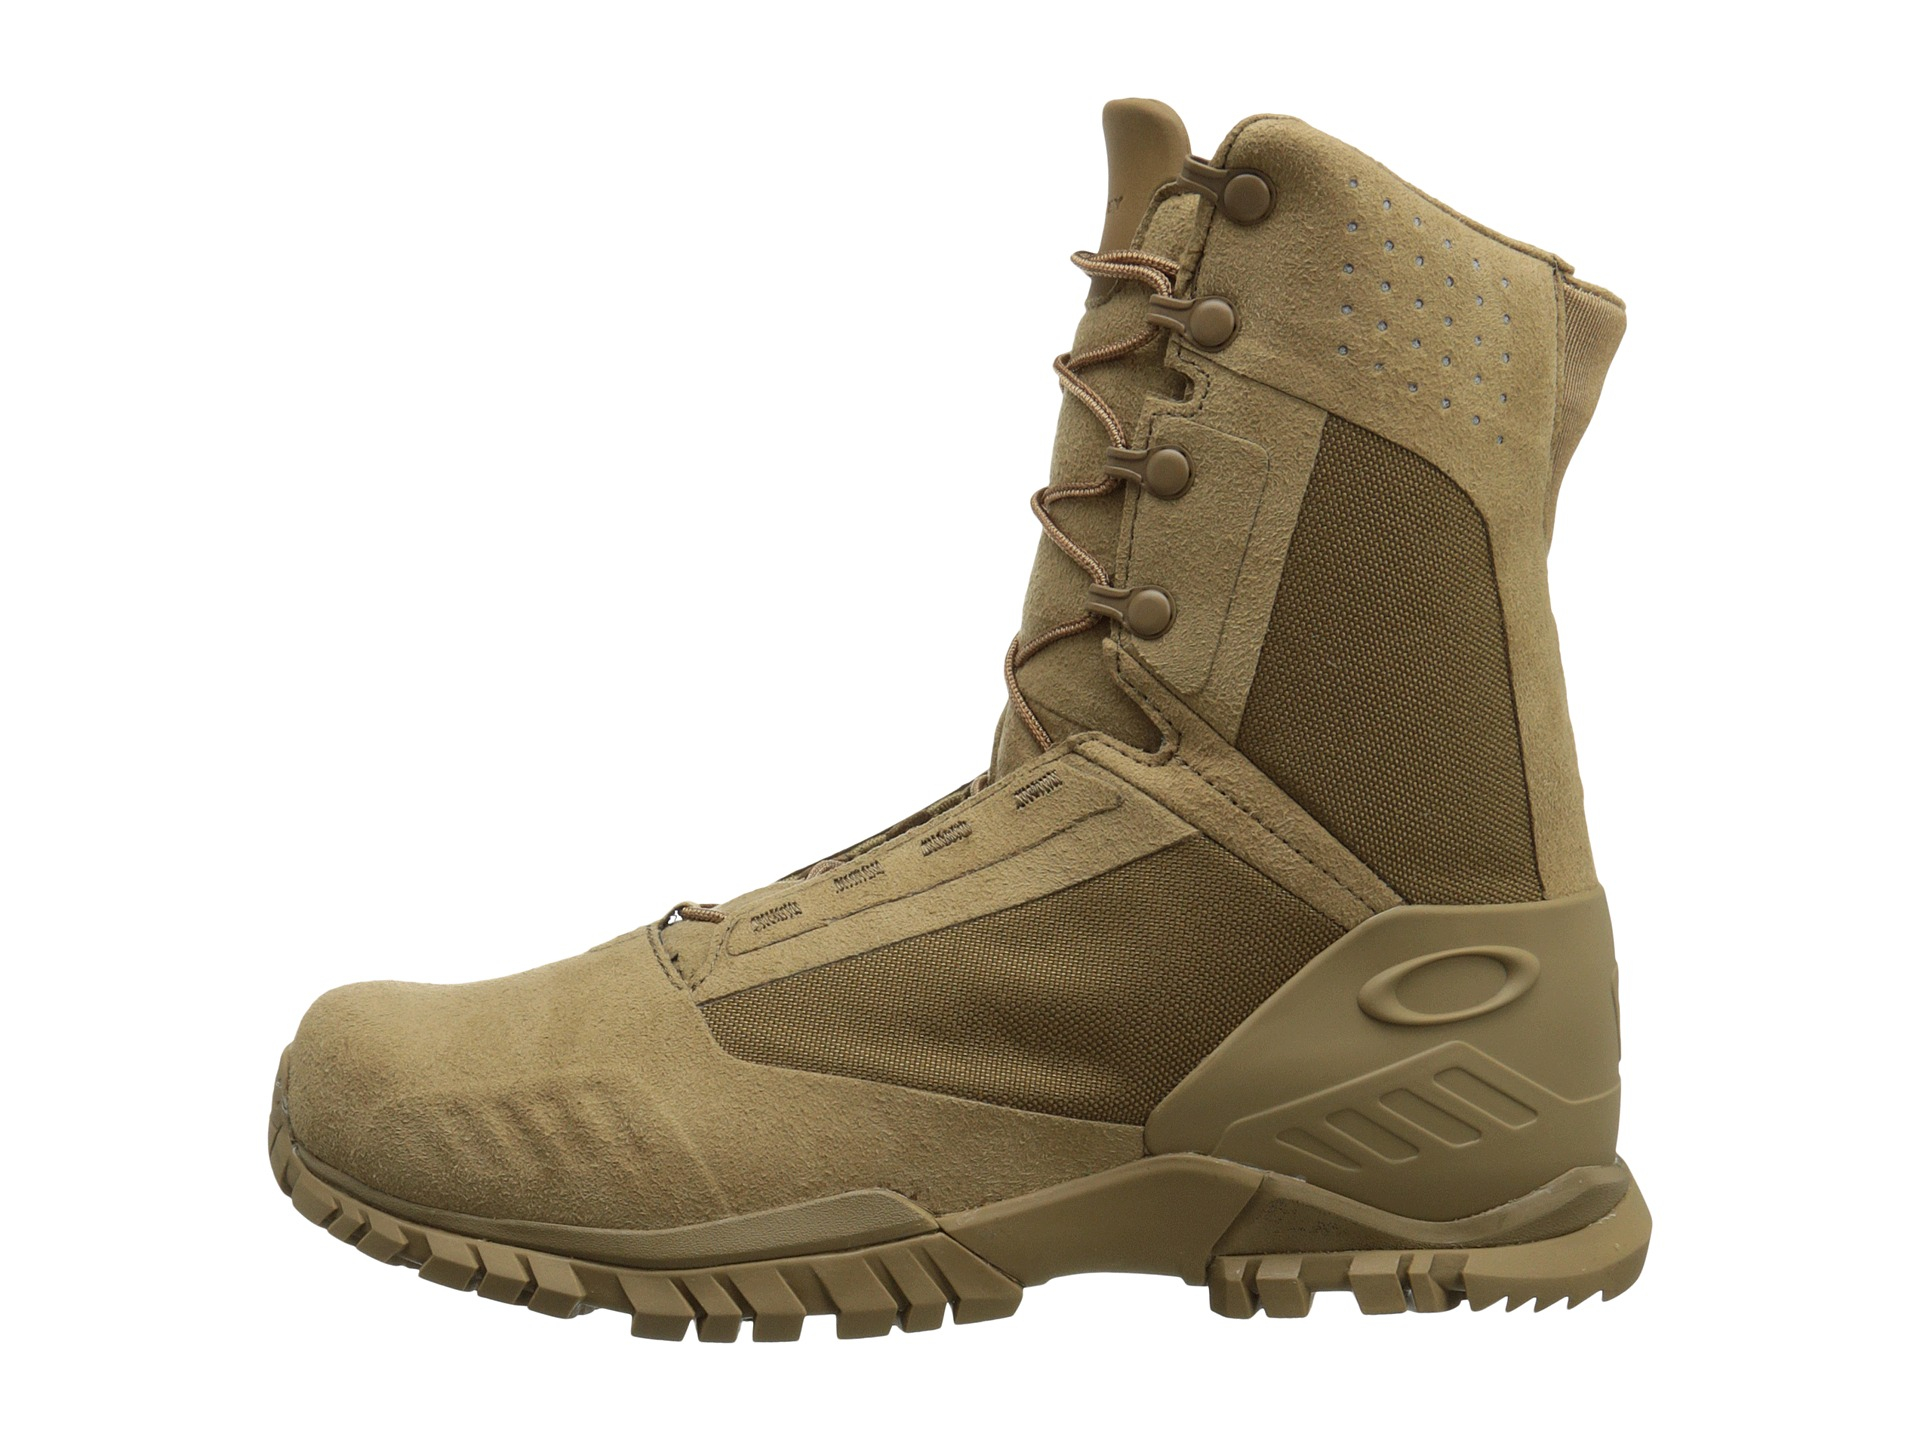 Lyst - Oakley Si-8 Lightweight Military Boot 8 Inch in Green for Men